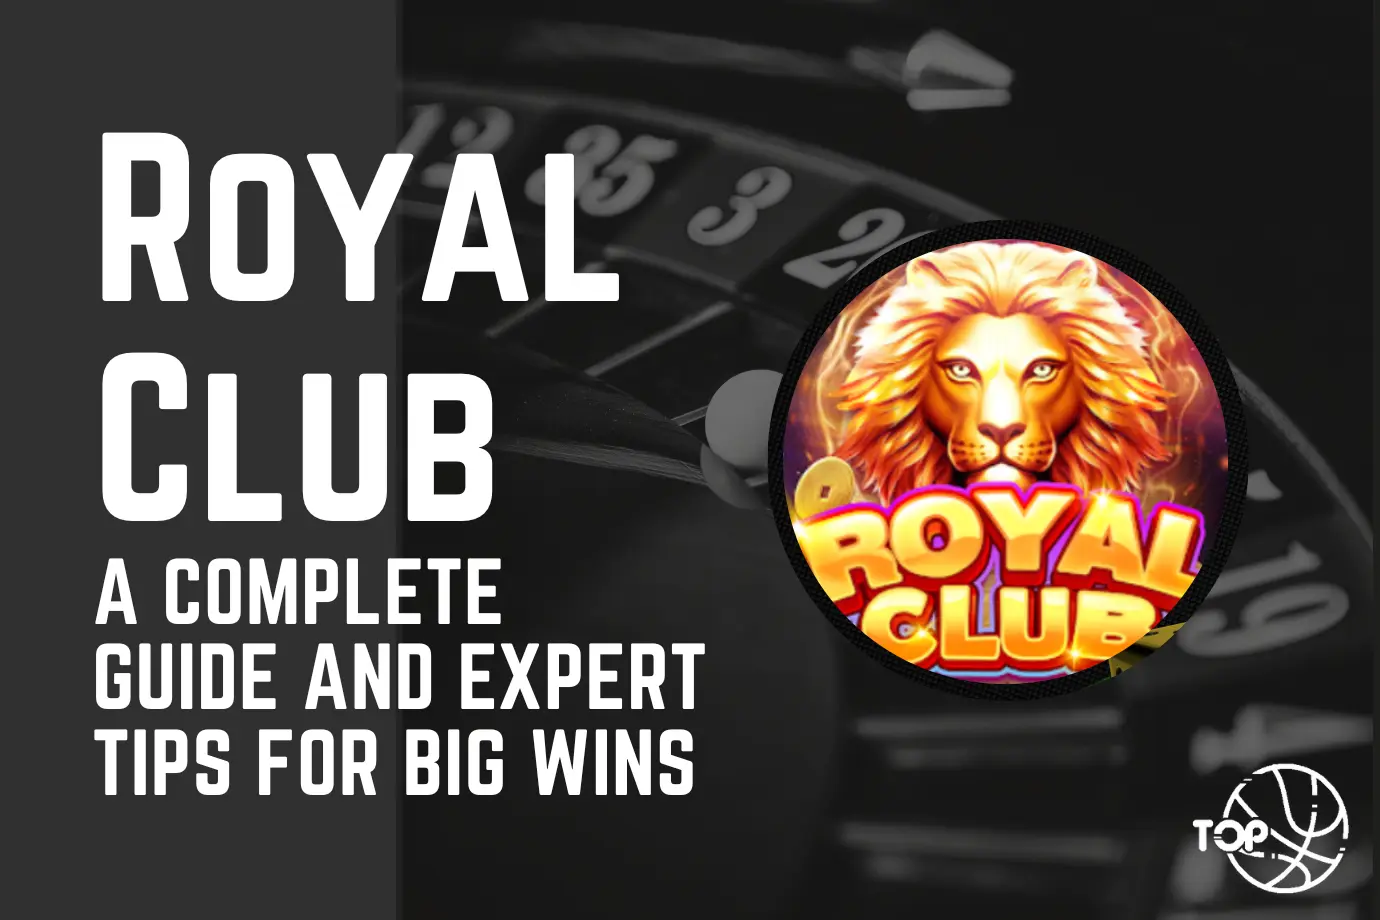 Royal Club: A Complete Guide and Expert Tips for Big Wins